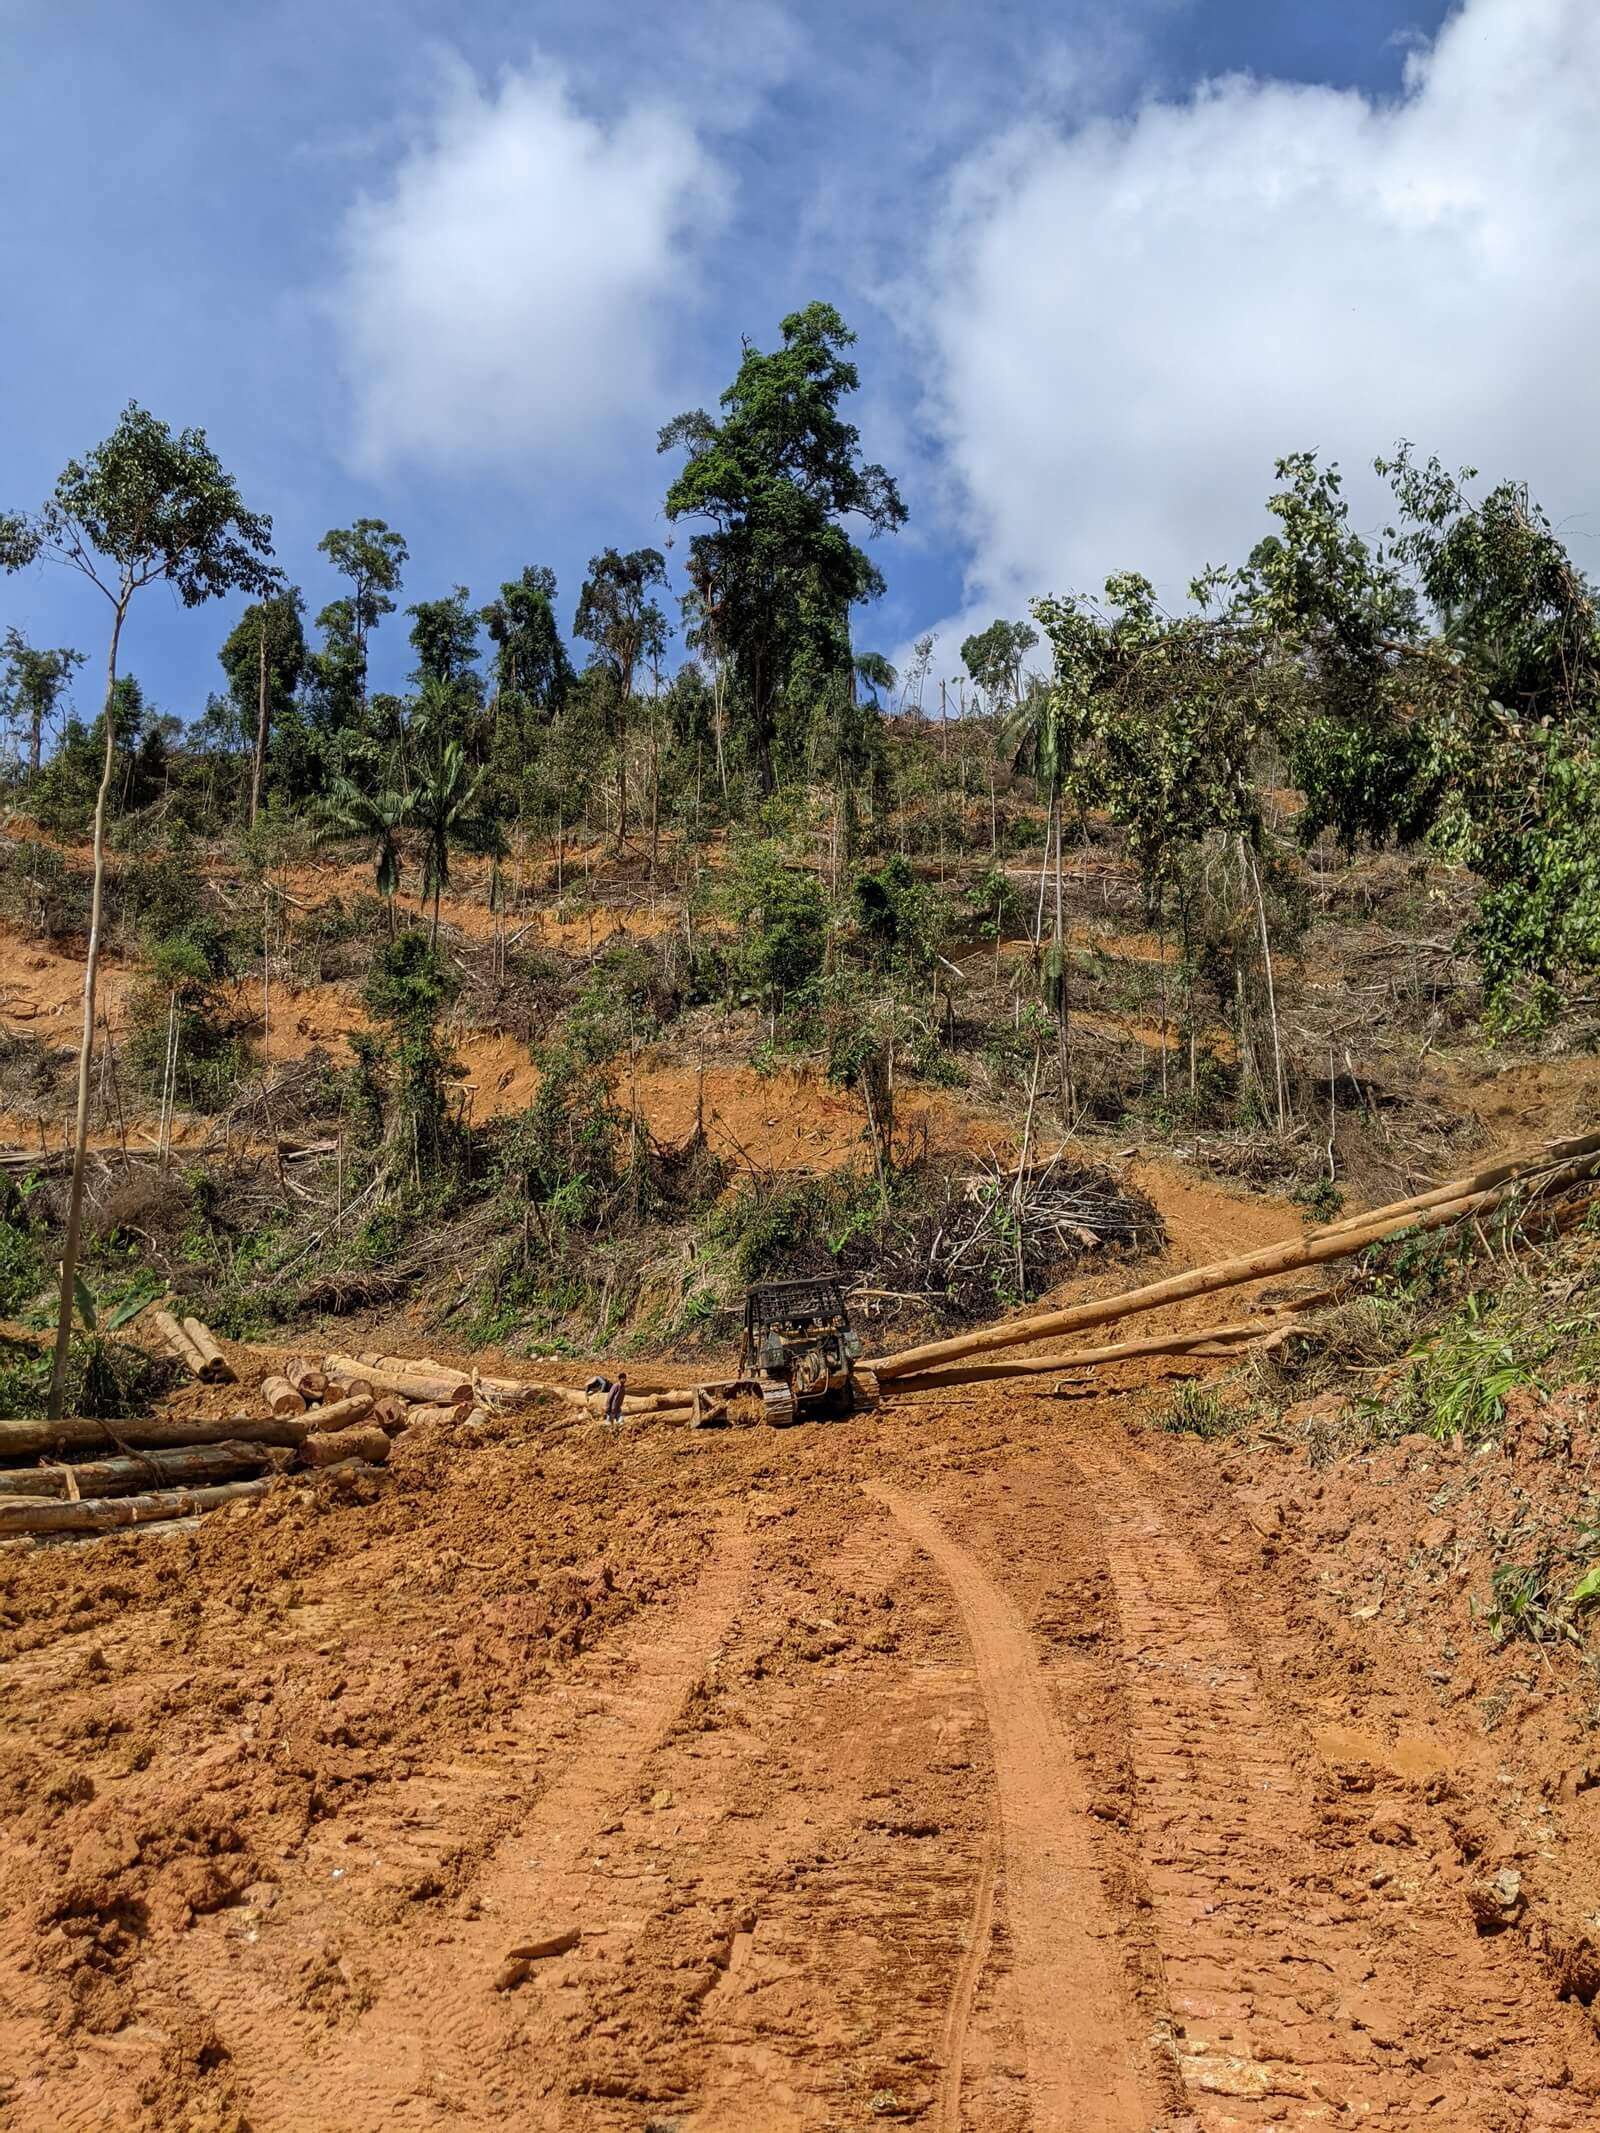 A site west of Kampung Kaloi is cleared to become a rubber plantation. Photo: Yao-Hua Law